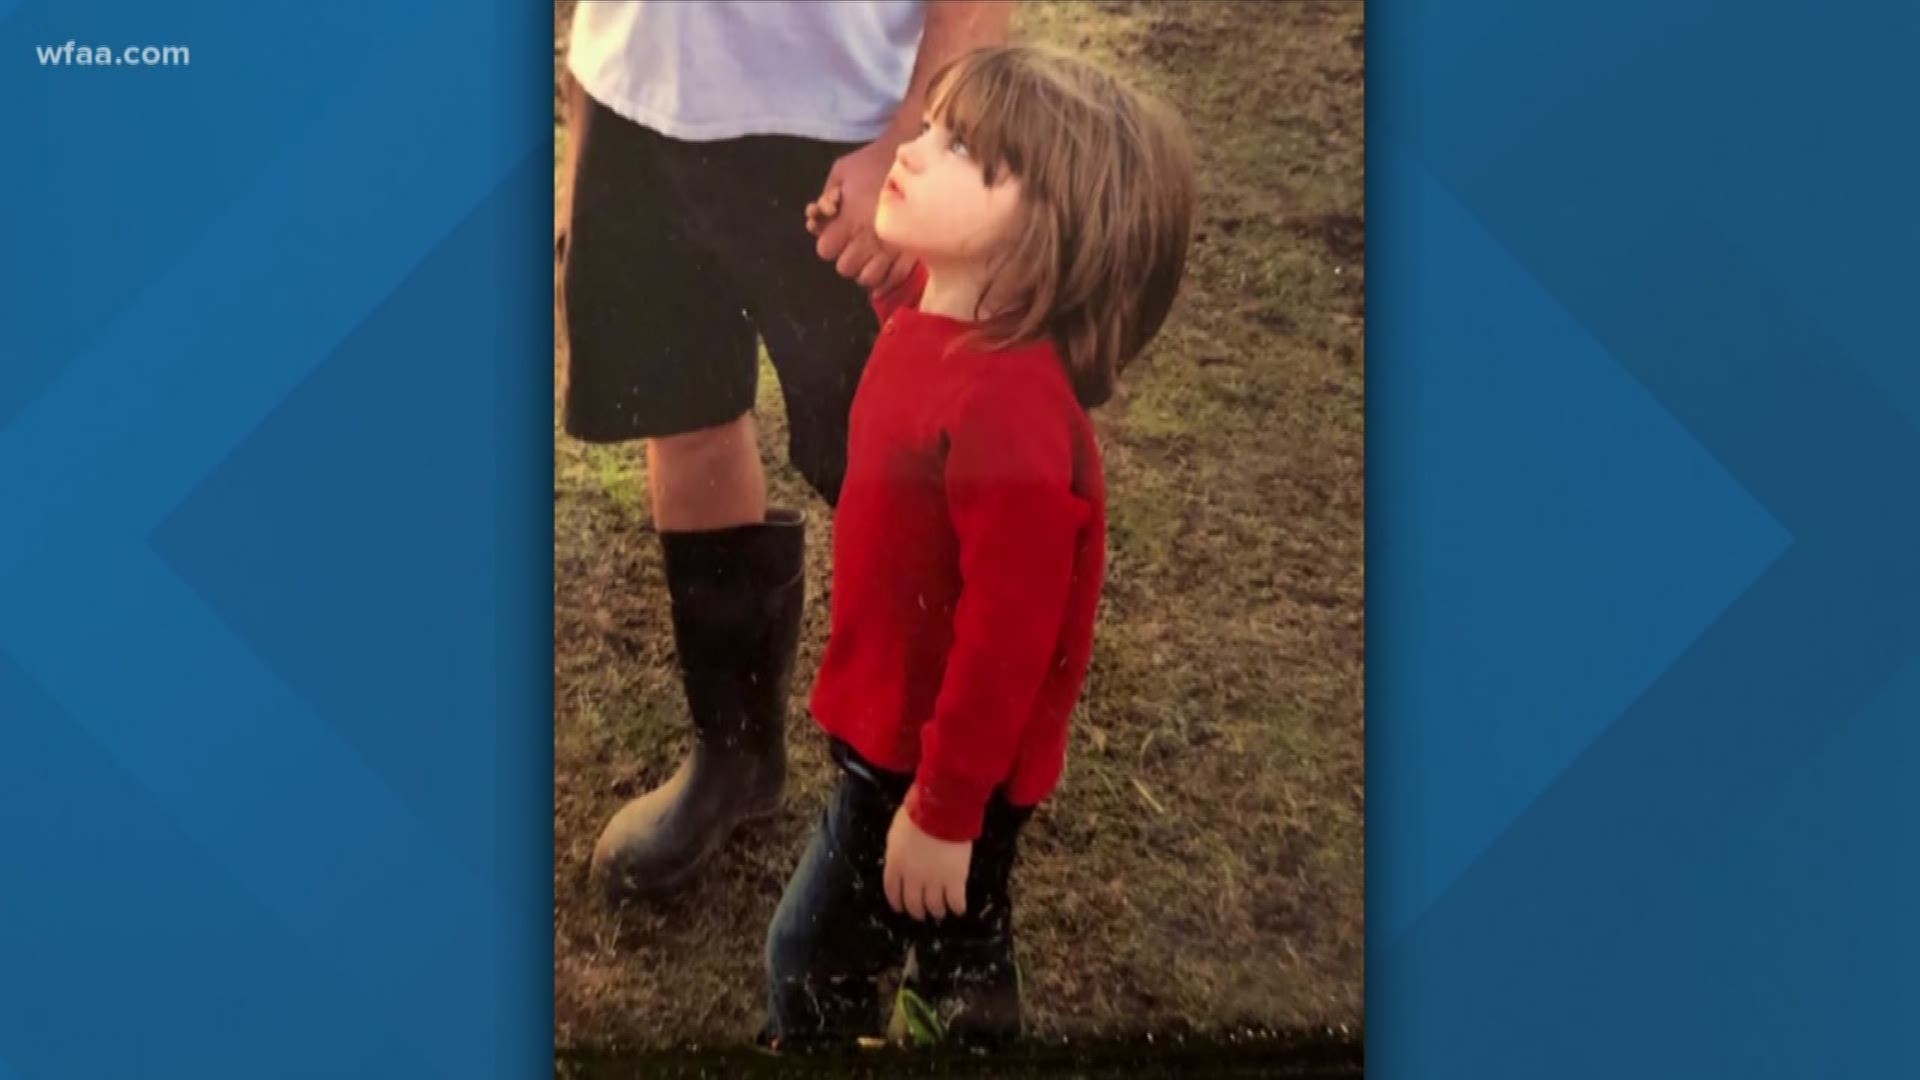 Missing Kaufman boy with autism found deceased in pond near home